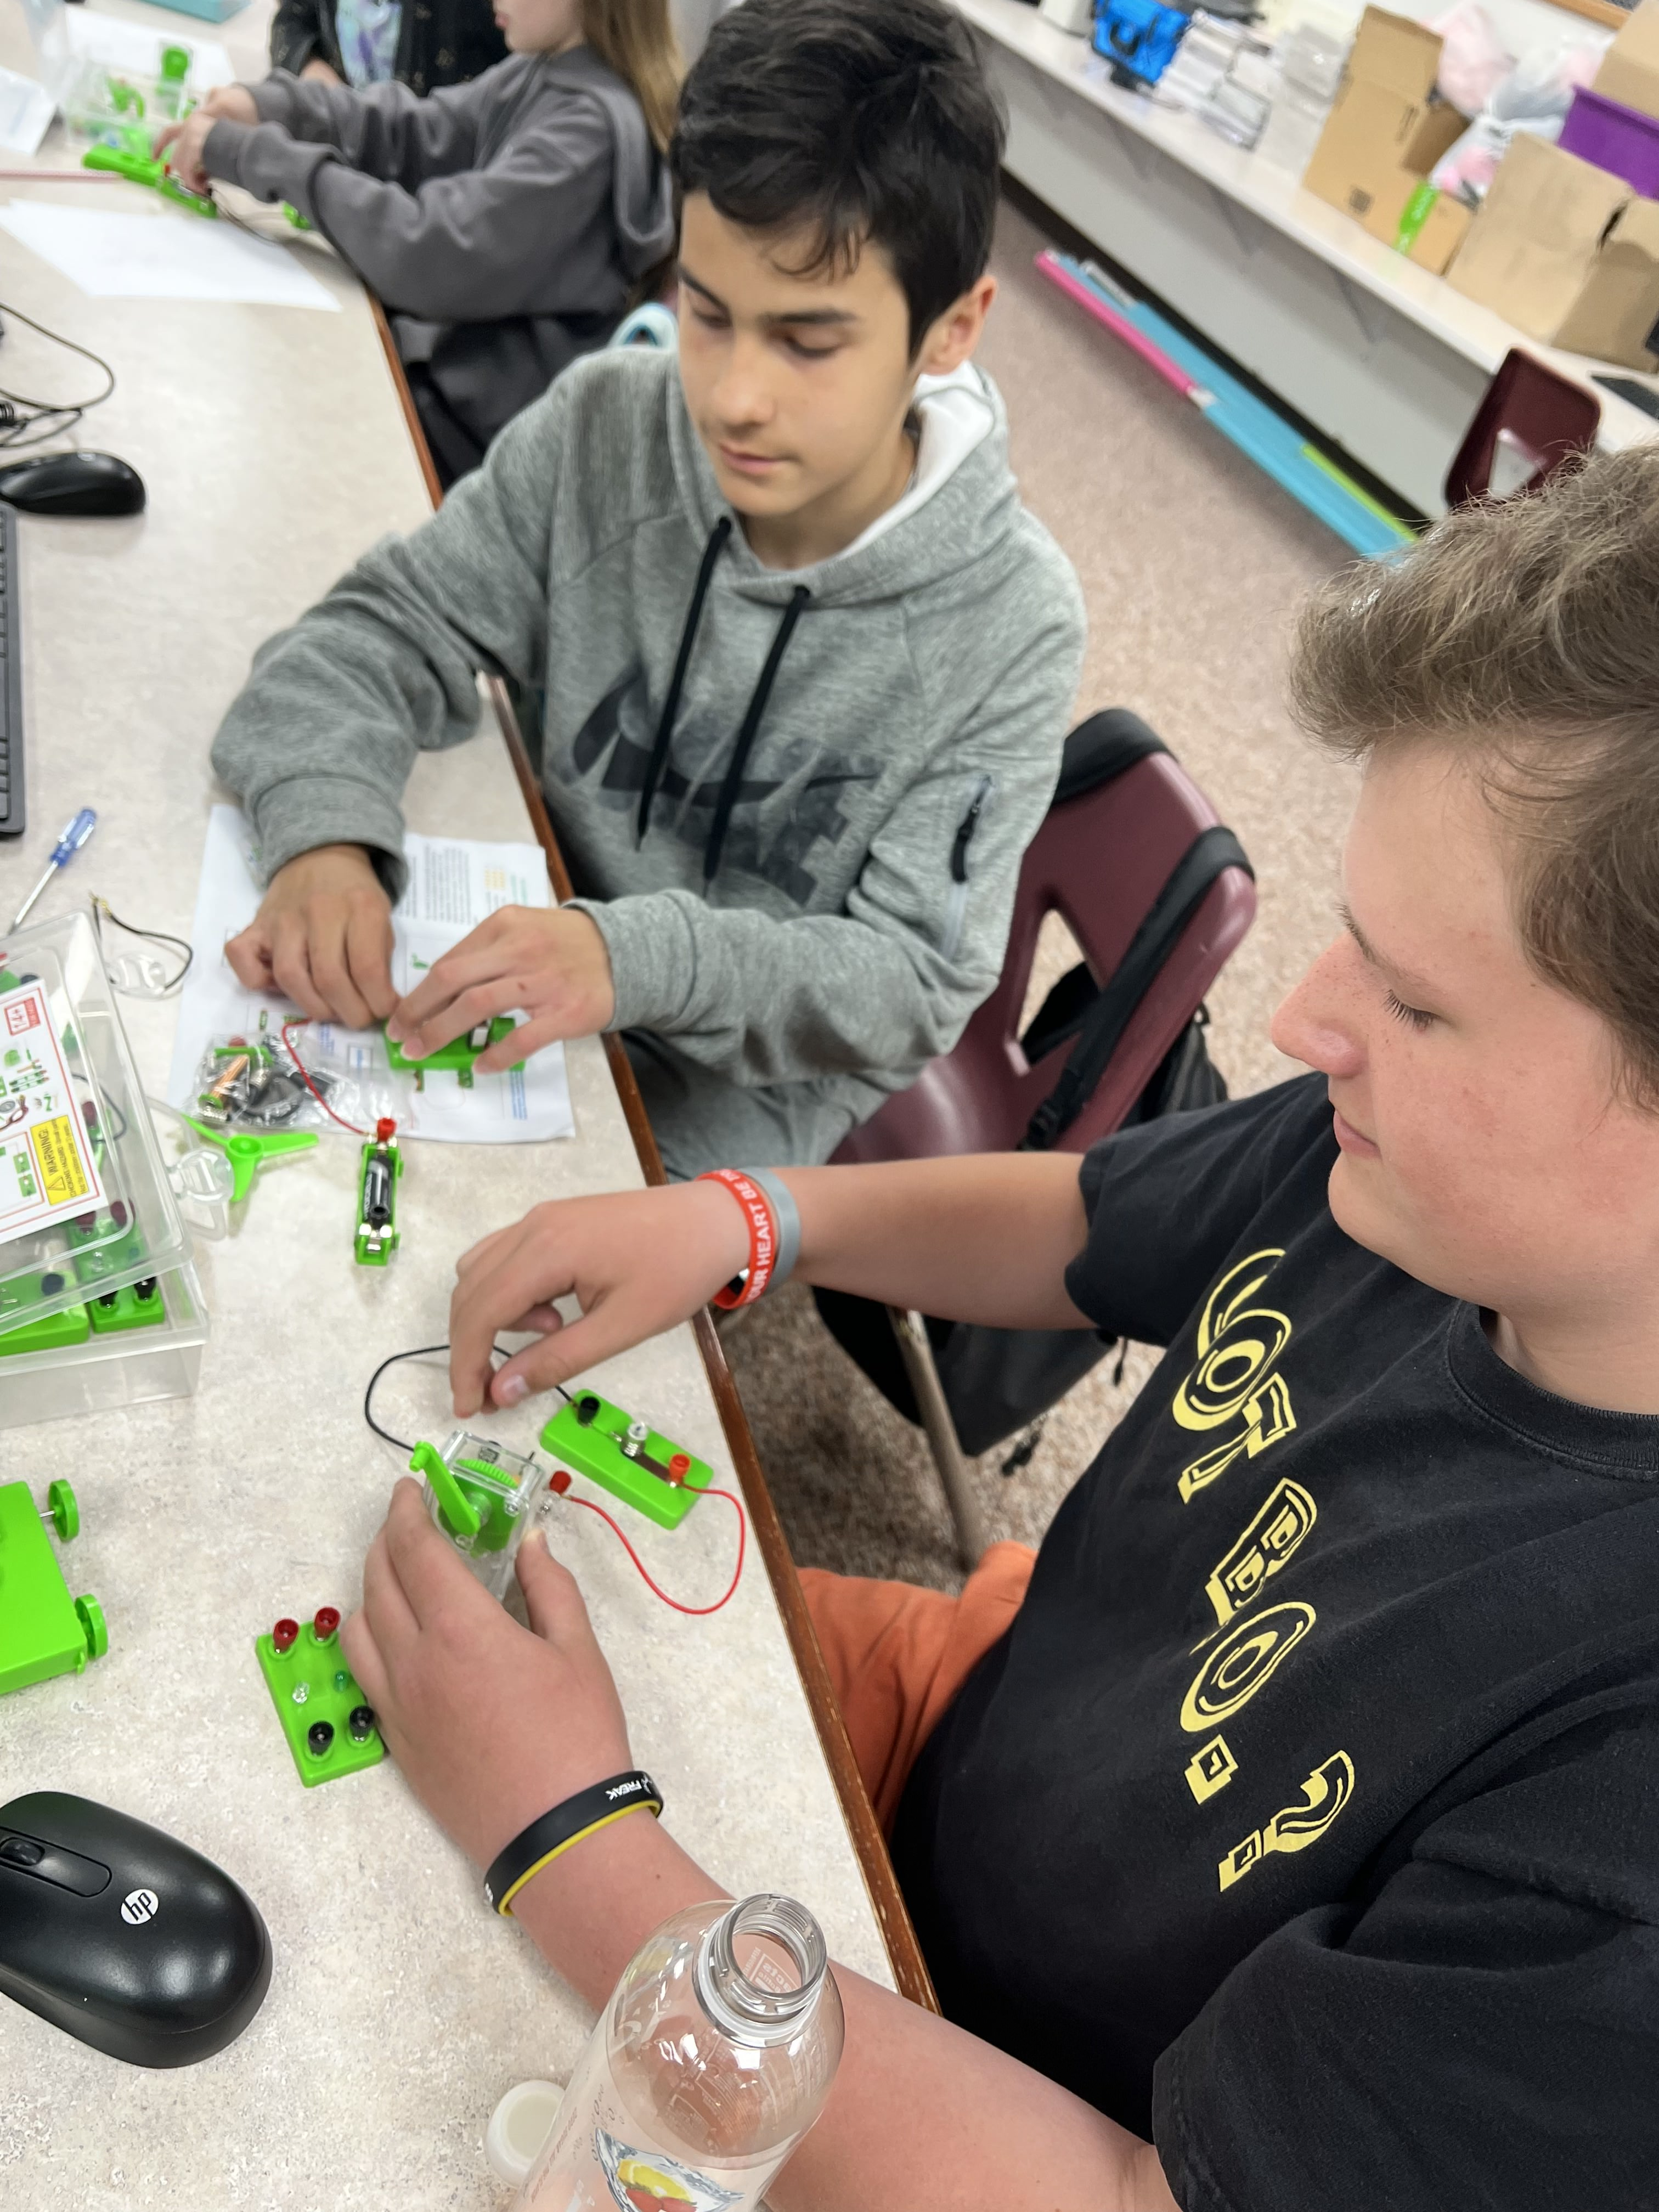 Students putting together circuits